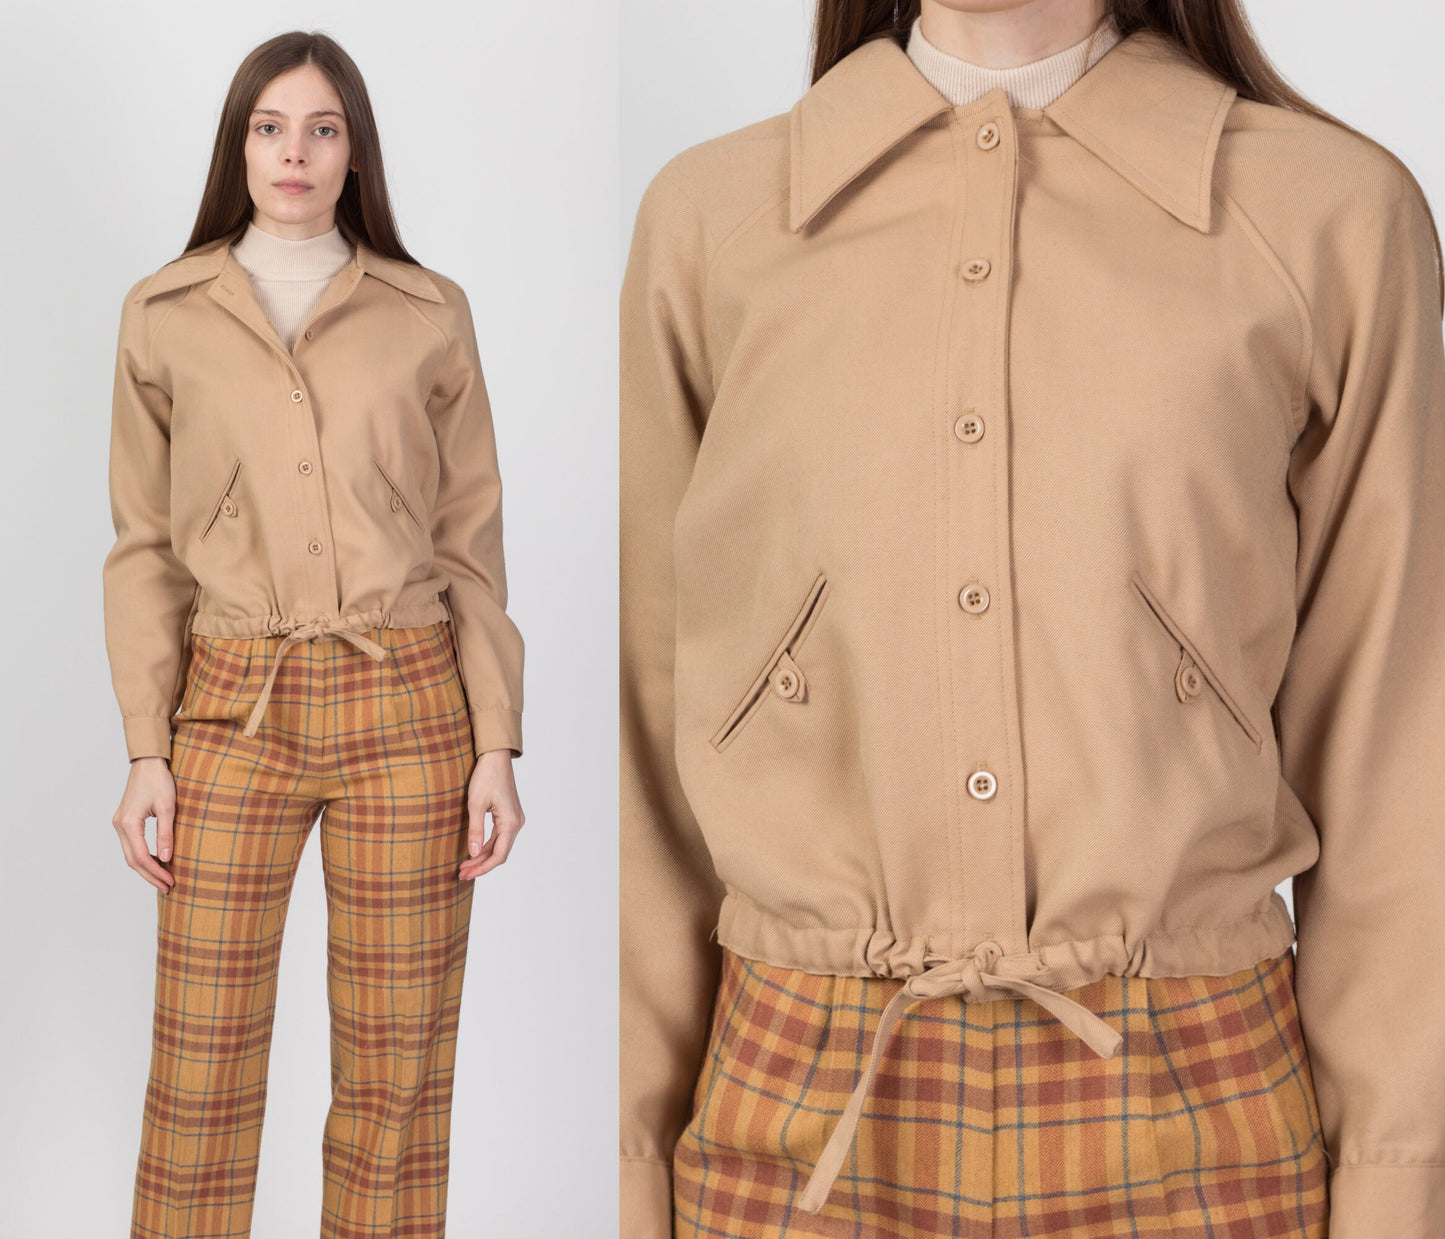 70s Tan Cropped Cinched Waist Jacket - Small to Medium 